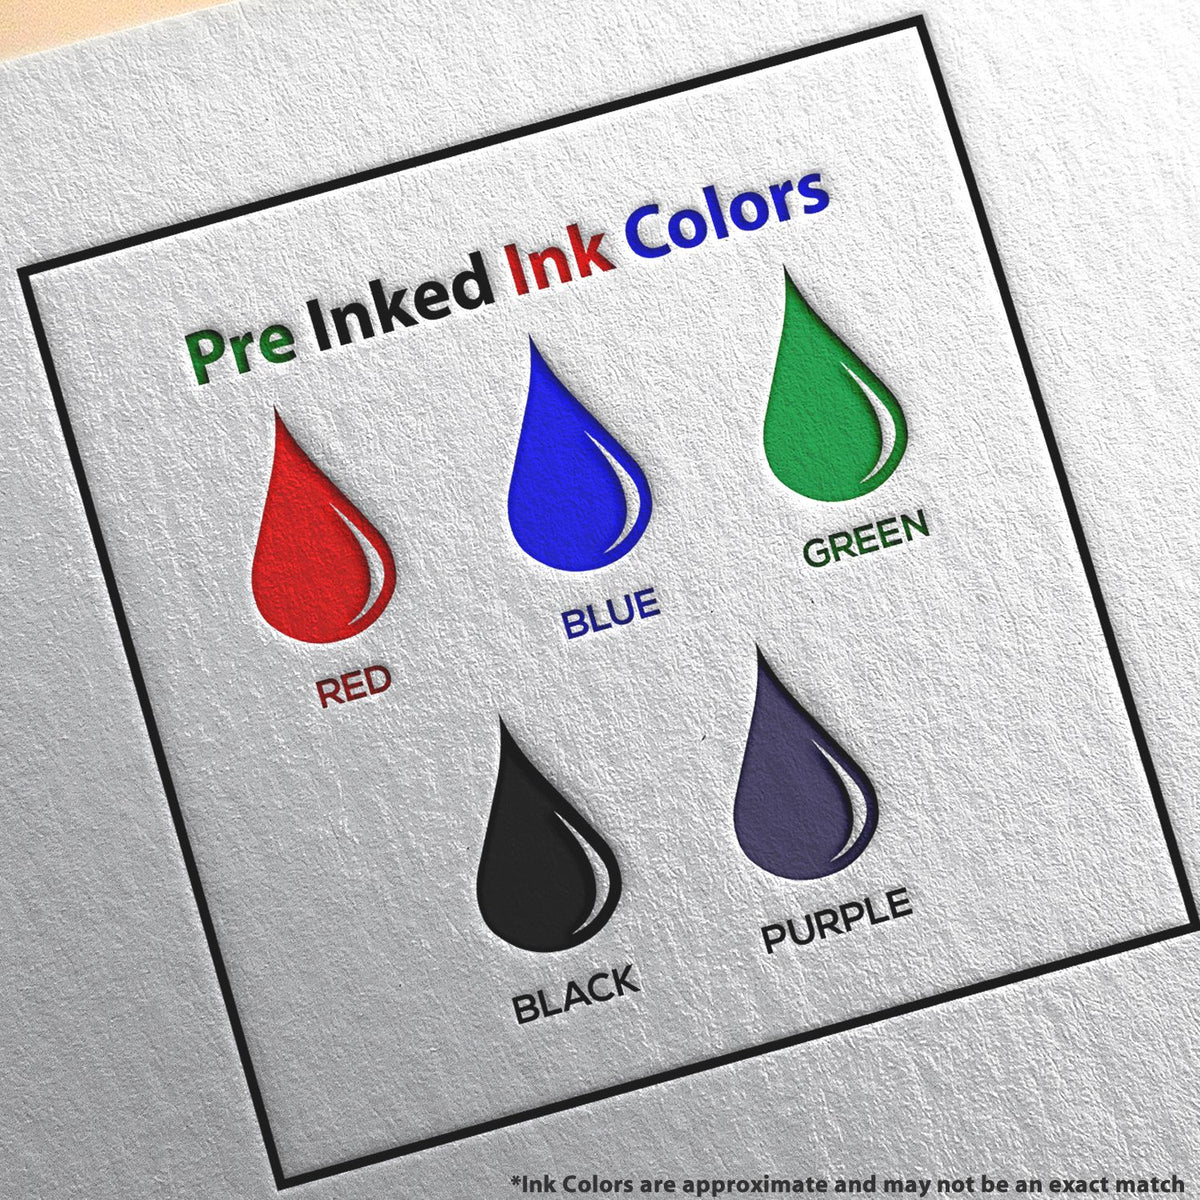 A picture showing the different ink colors or hues available for the Slim Pre-Inked South Carolina Landscape Architect Seal Stamp product.